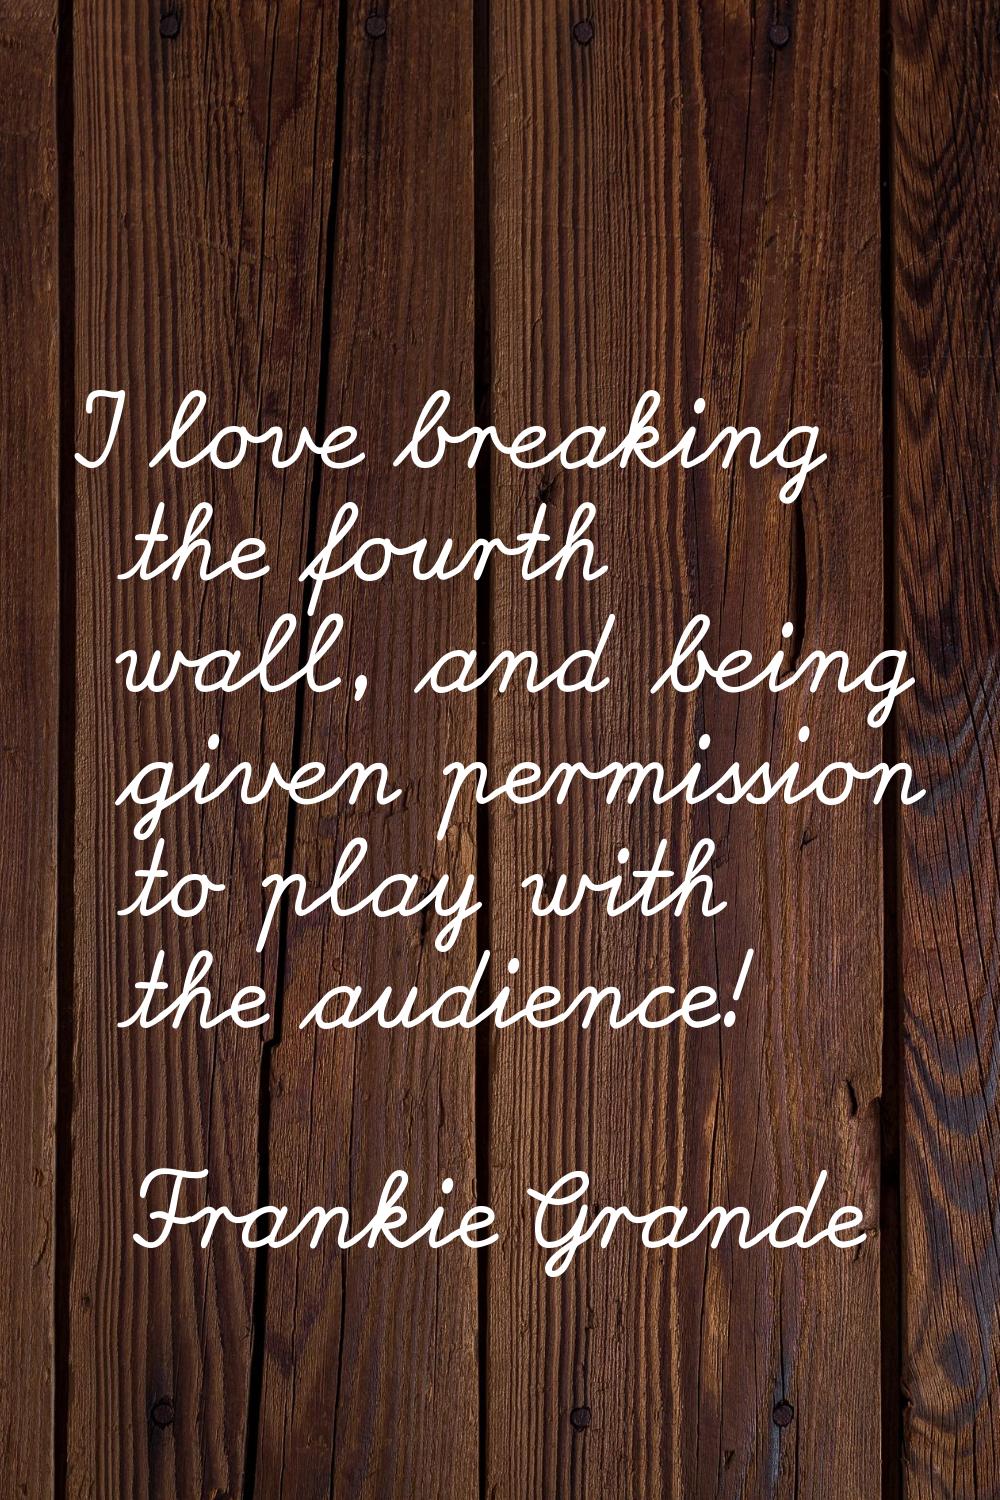 I love breaking the fourth wall, and being given permission to play with the audience!